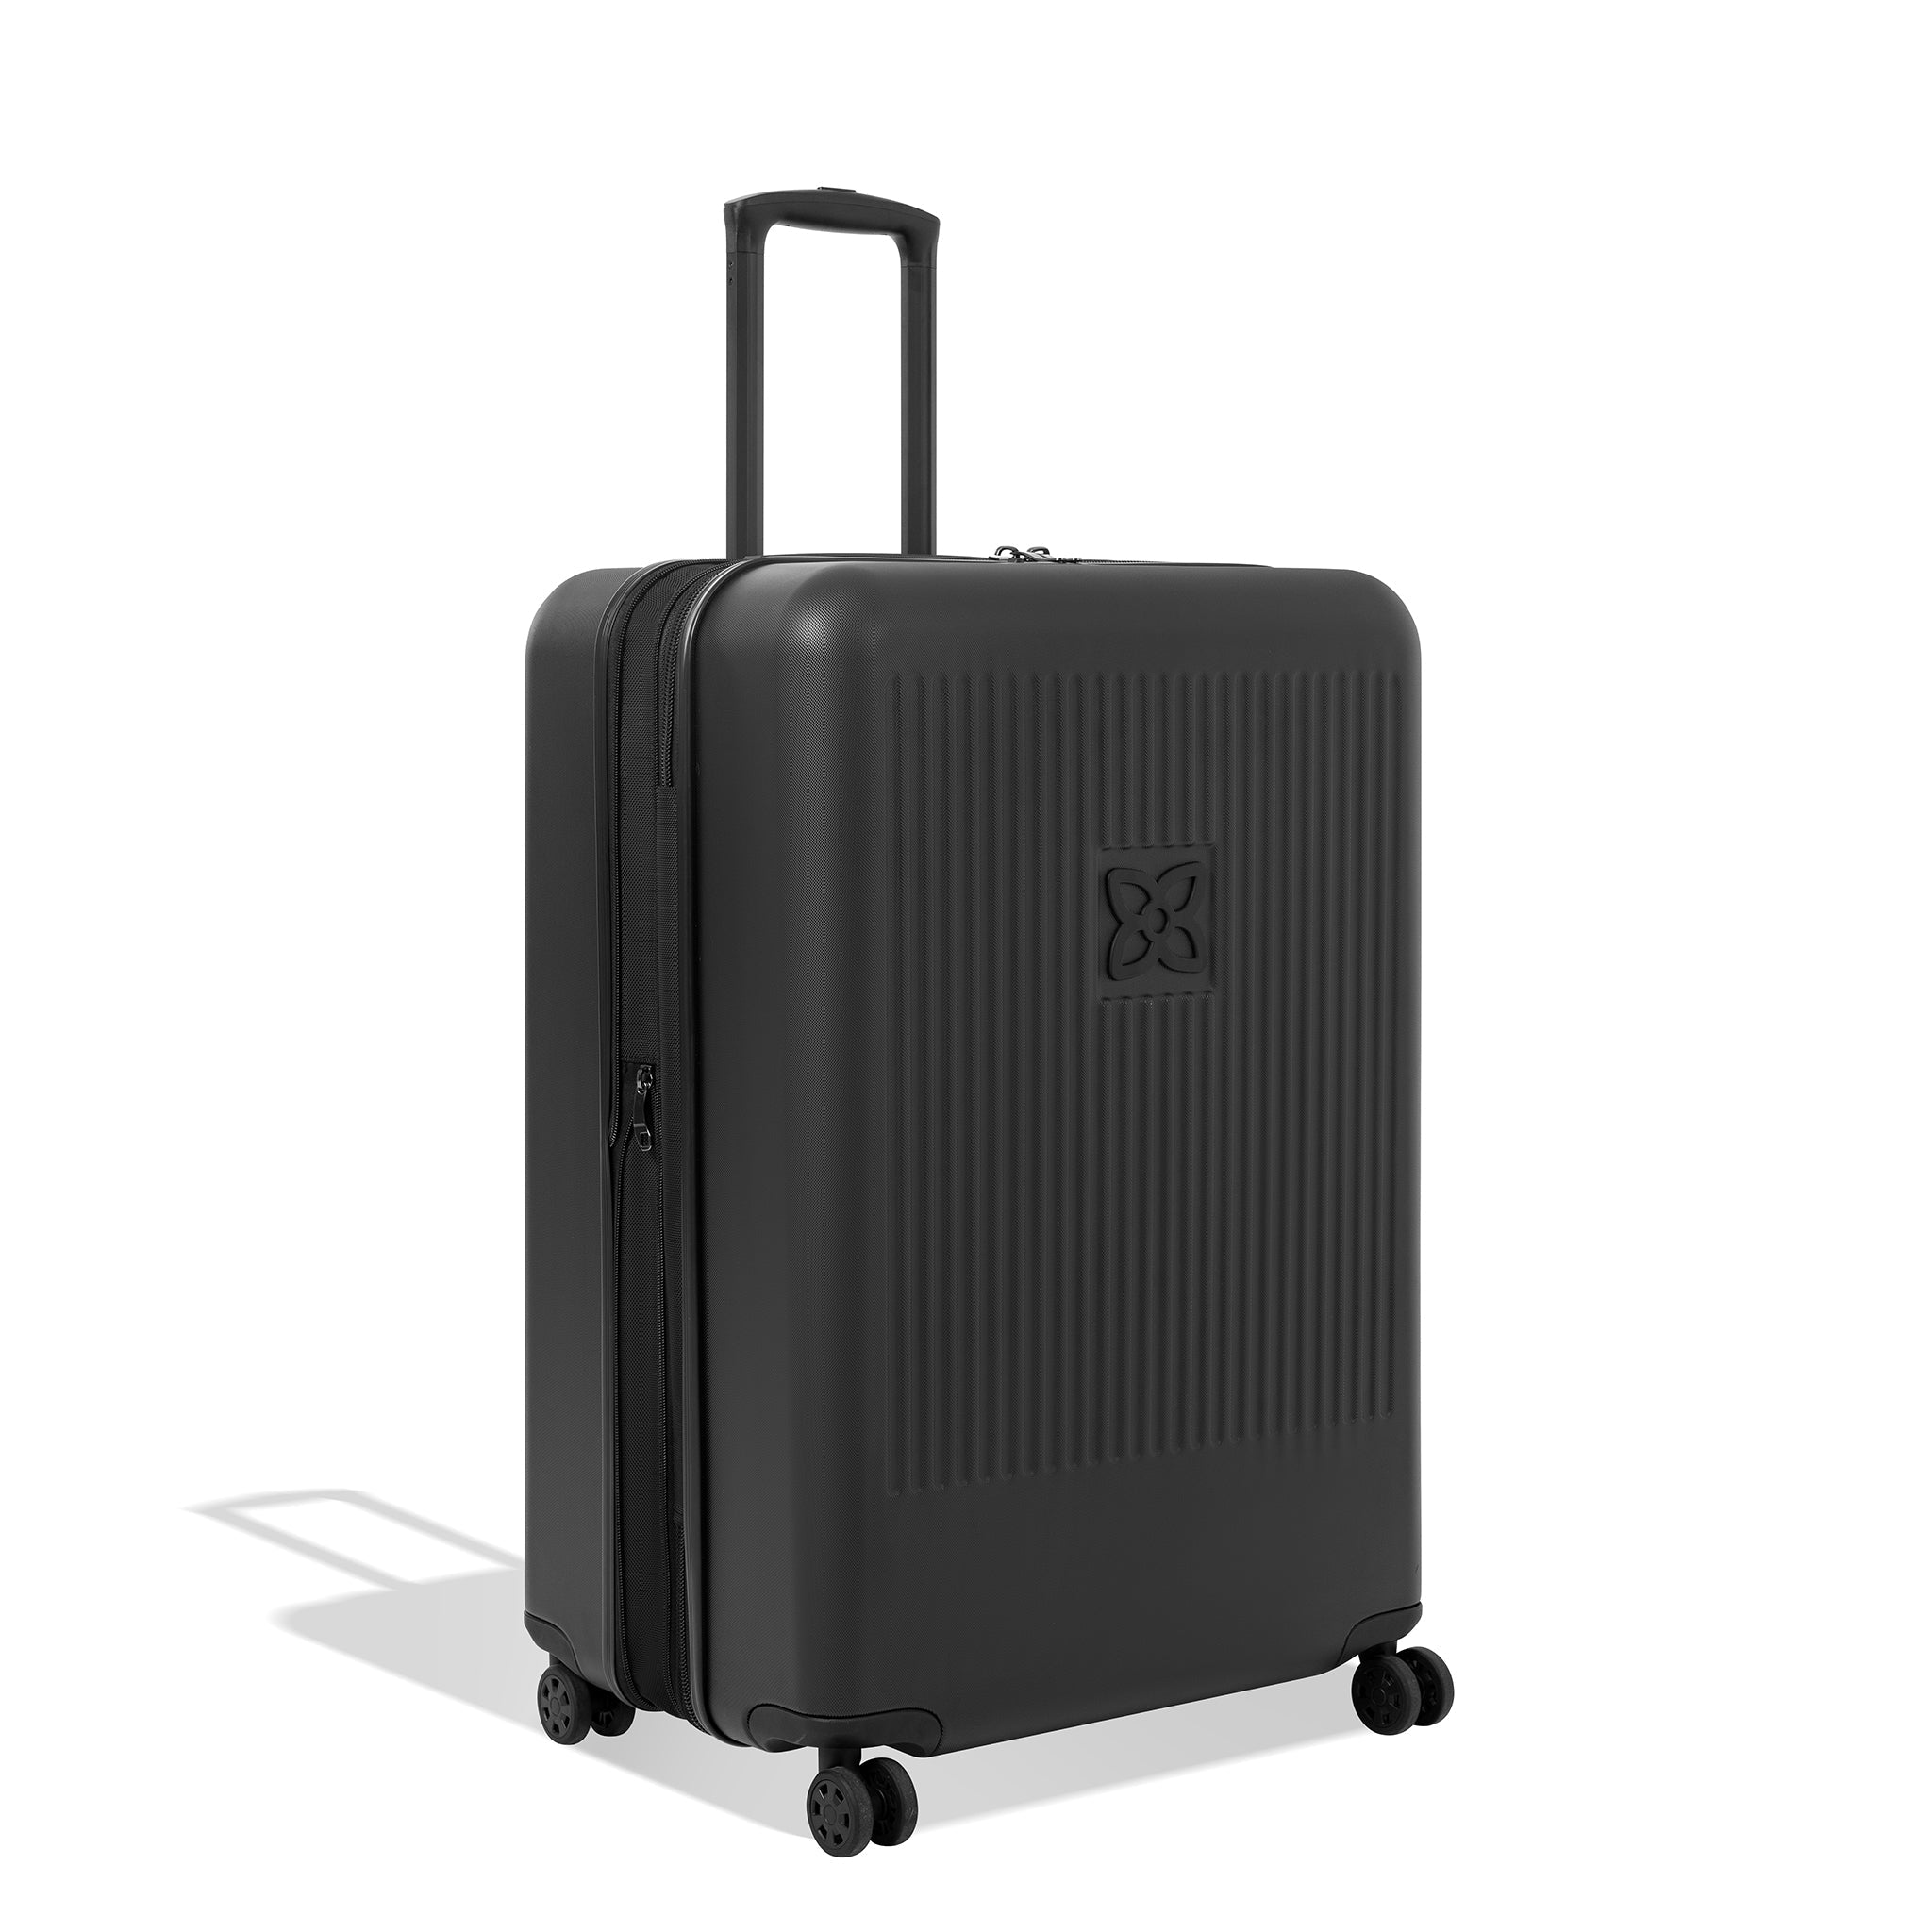 Angled front view of Sherpani hard-shell checked luggage, the Meridian in Black. Meridian features include a retractable luggage handle, uncrushable exterior, TSA-approved locking zippers and four 36-degree spinner wheels. 